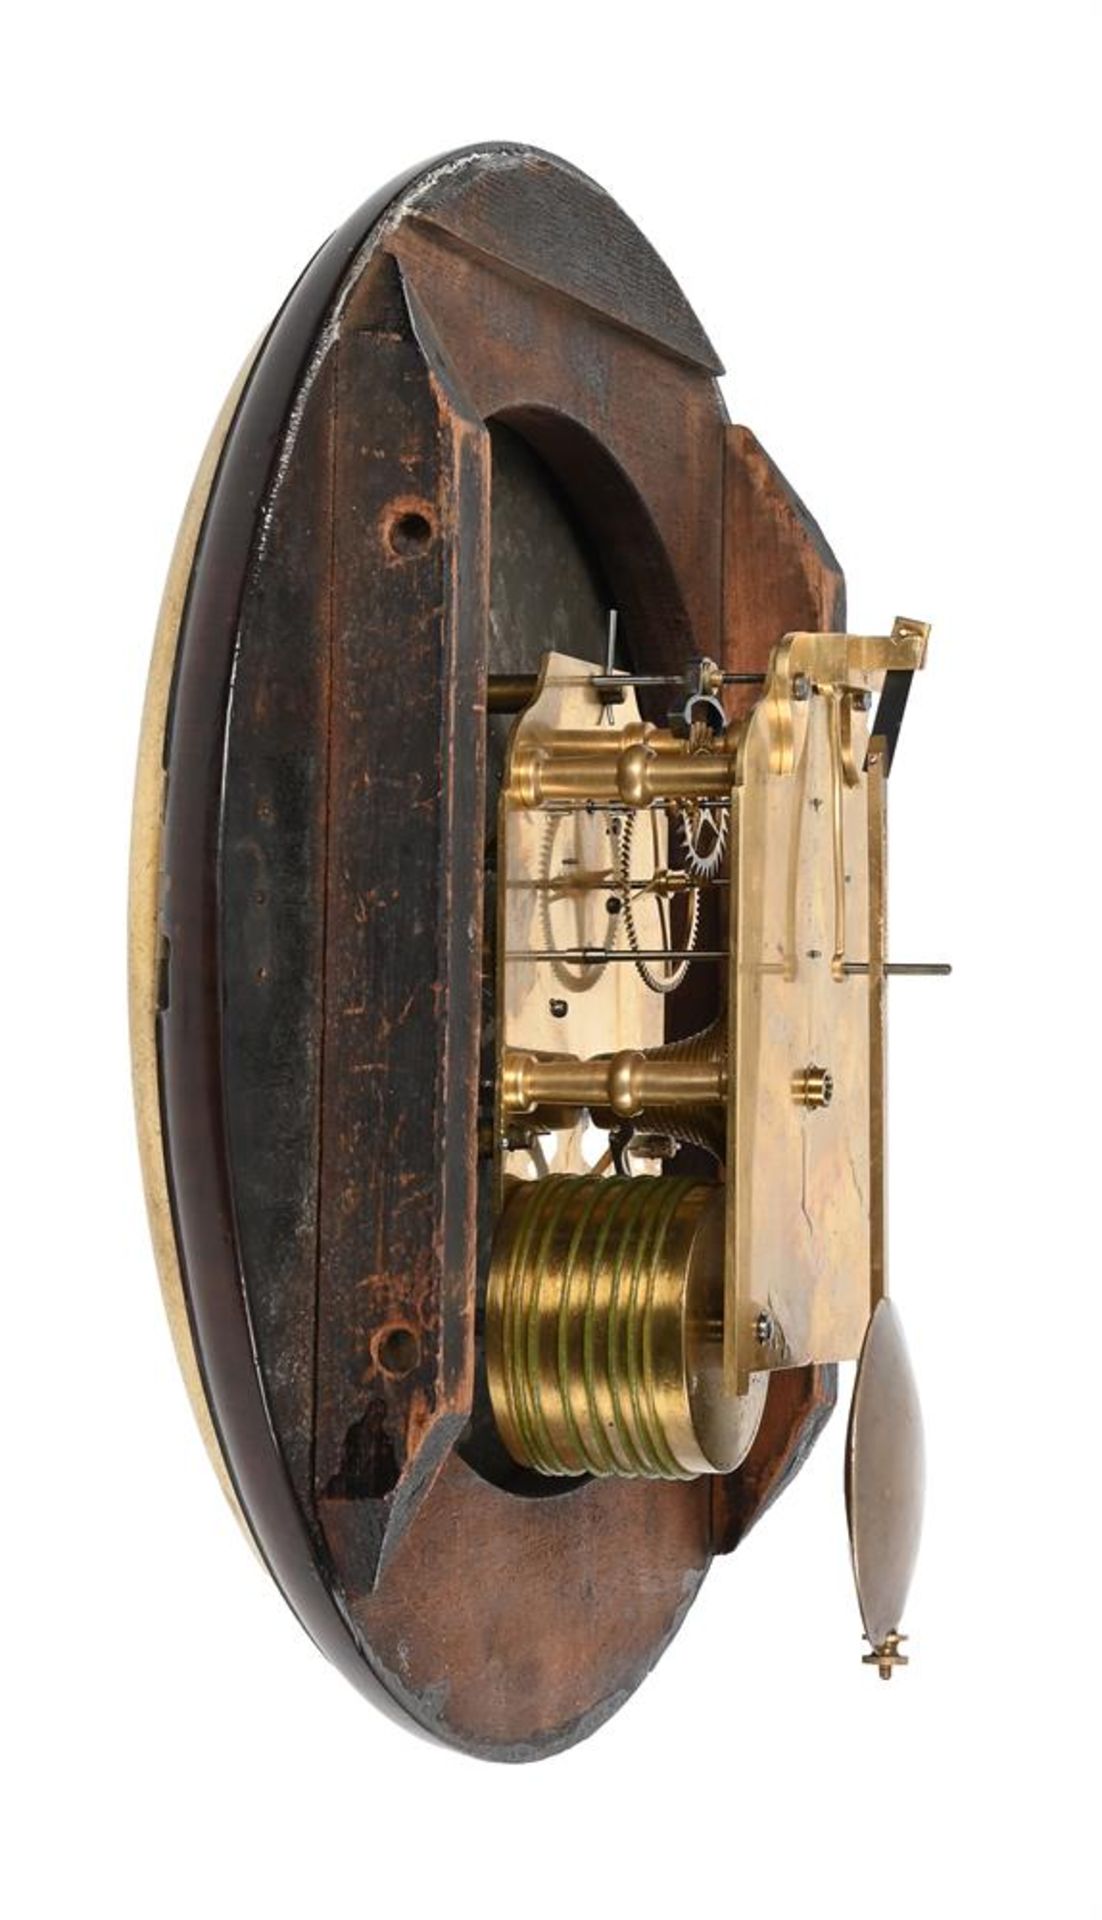 A REGENCY MAHOGANY FUSEE DIAL WALL TIMEPIECE - Image 2 of 3